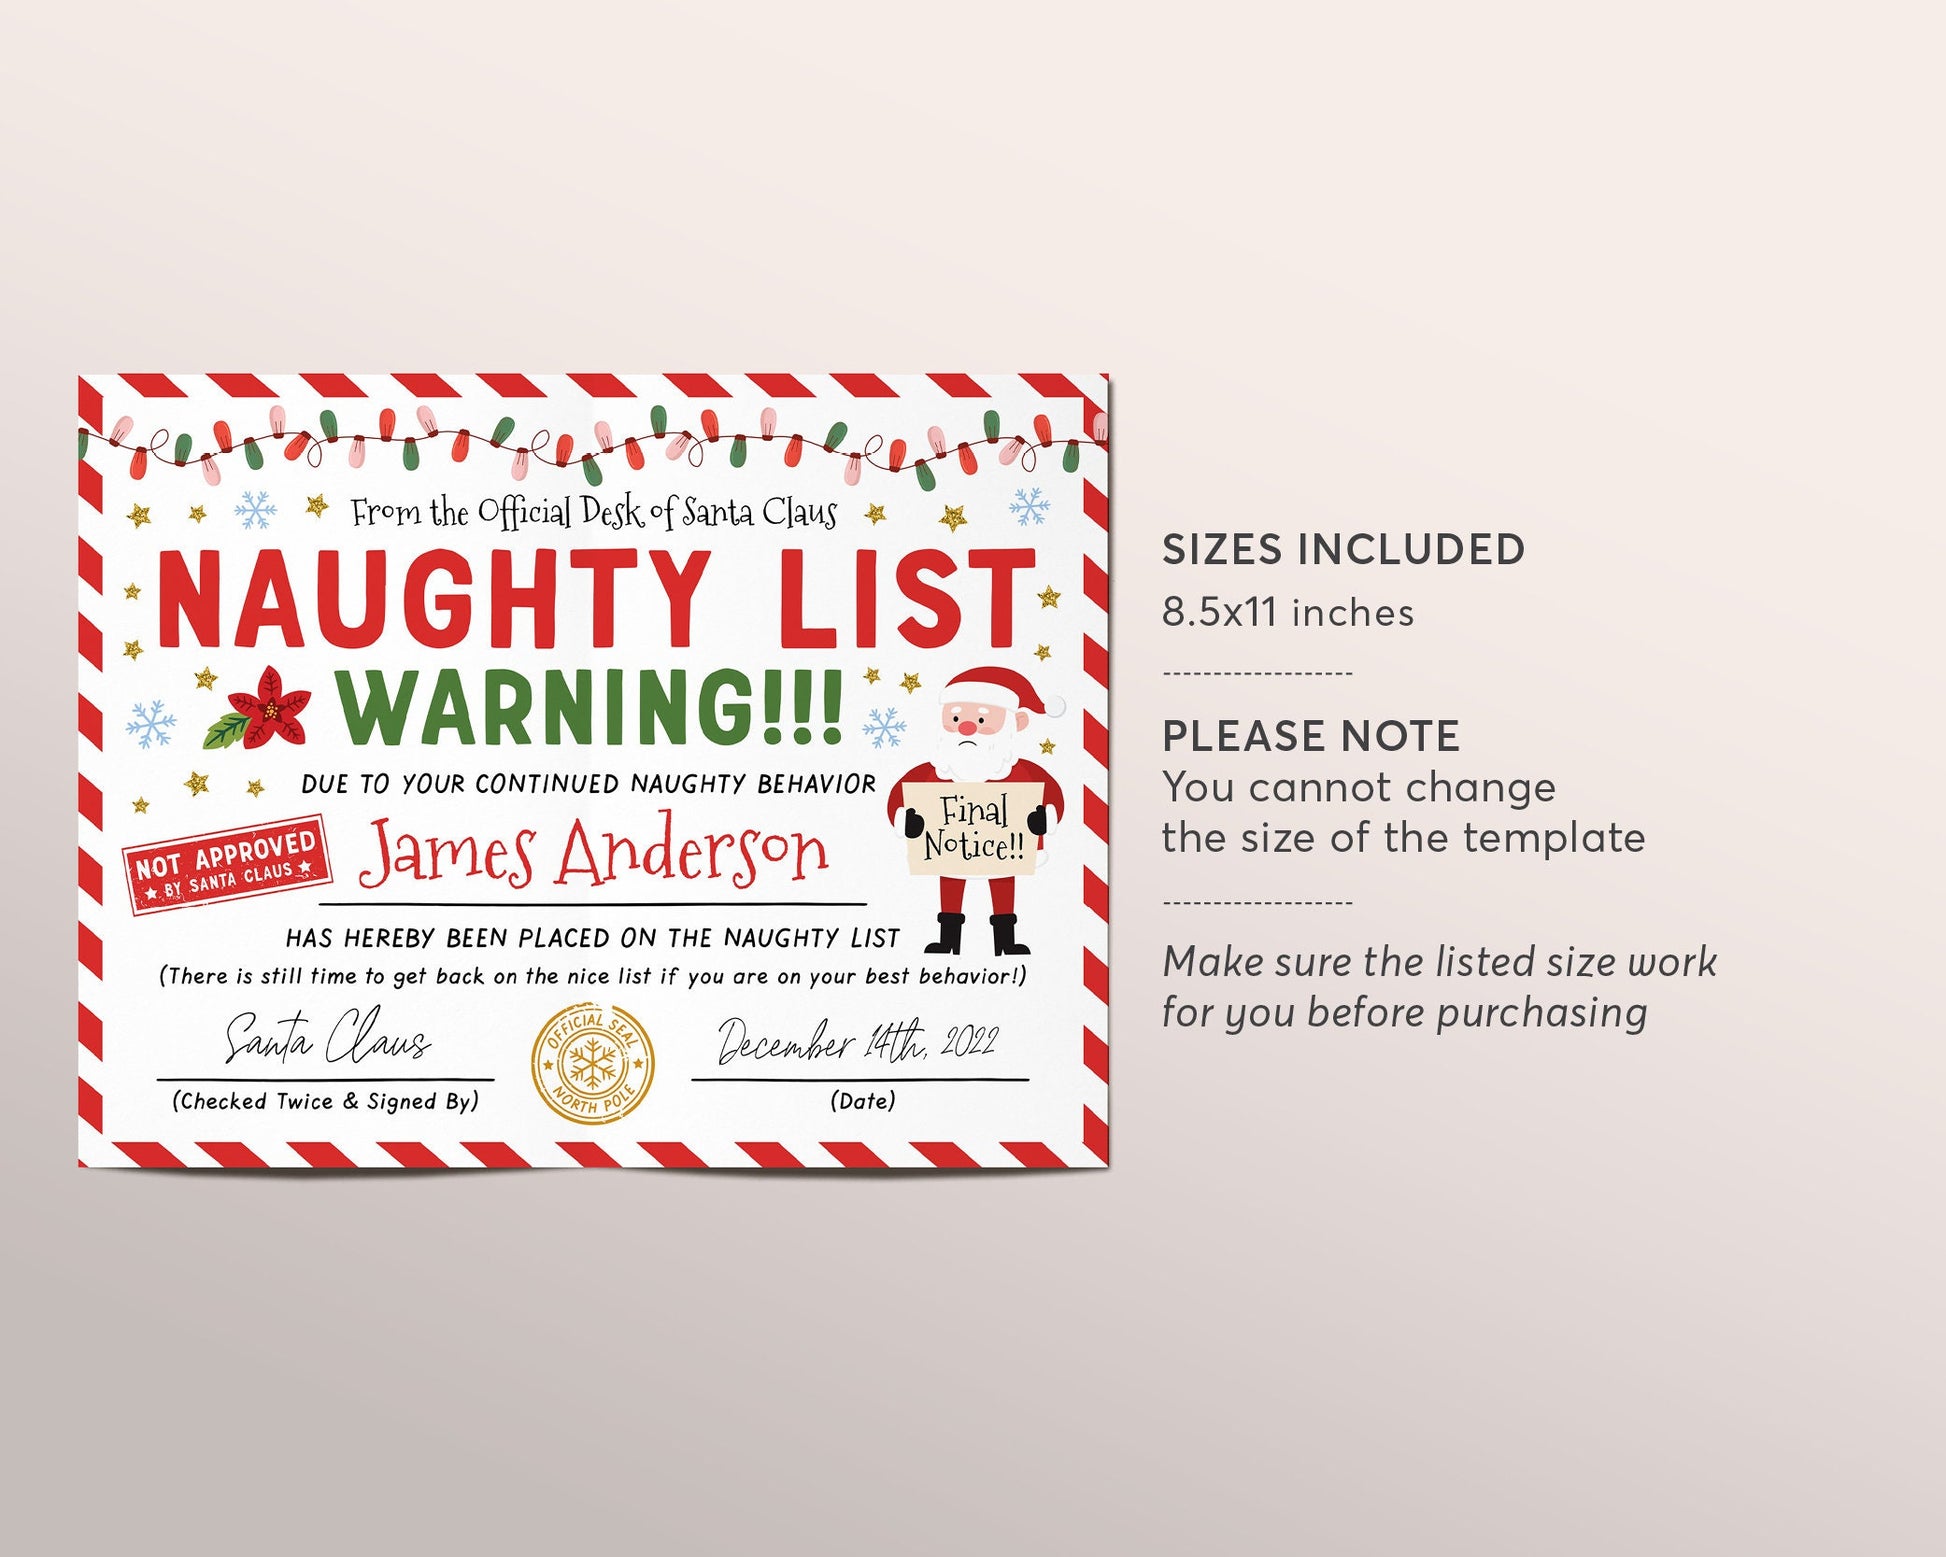 Christmas Count - 🚨🌟 SANTA'S OFFICIAL NAUGHTY LIST HAS JUST BEEN  ANNOUNCED!! 🌟🚨